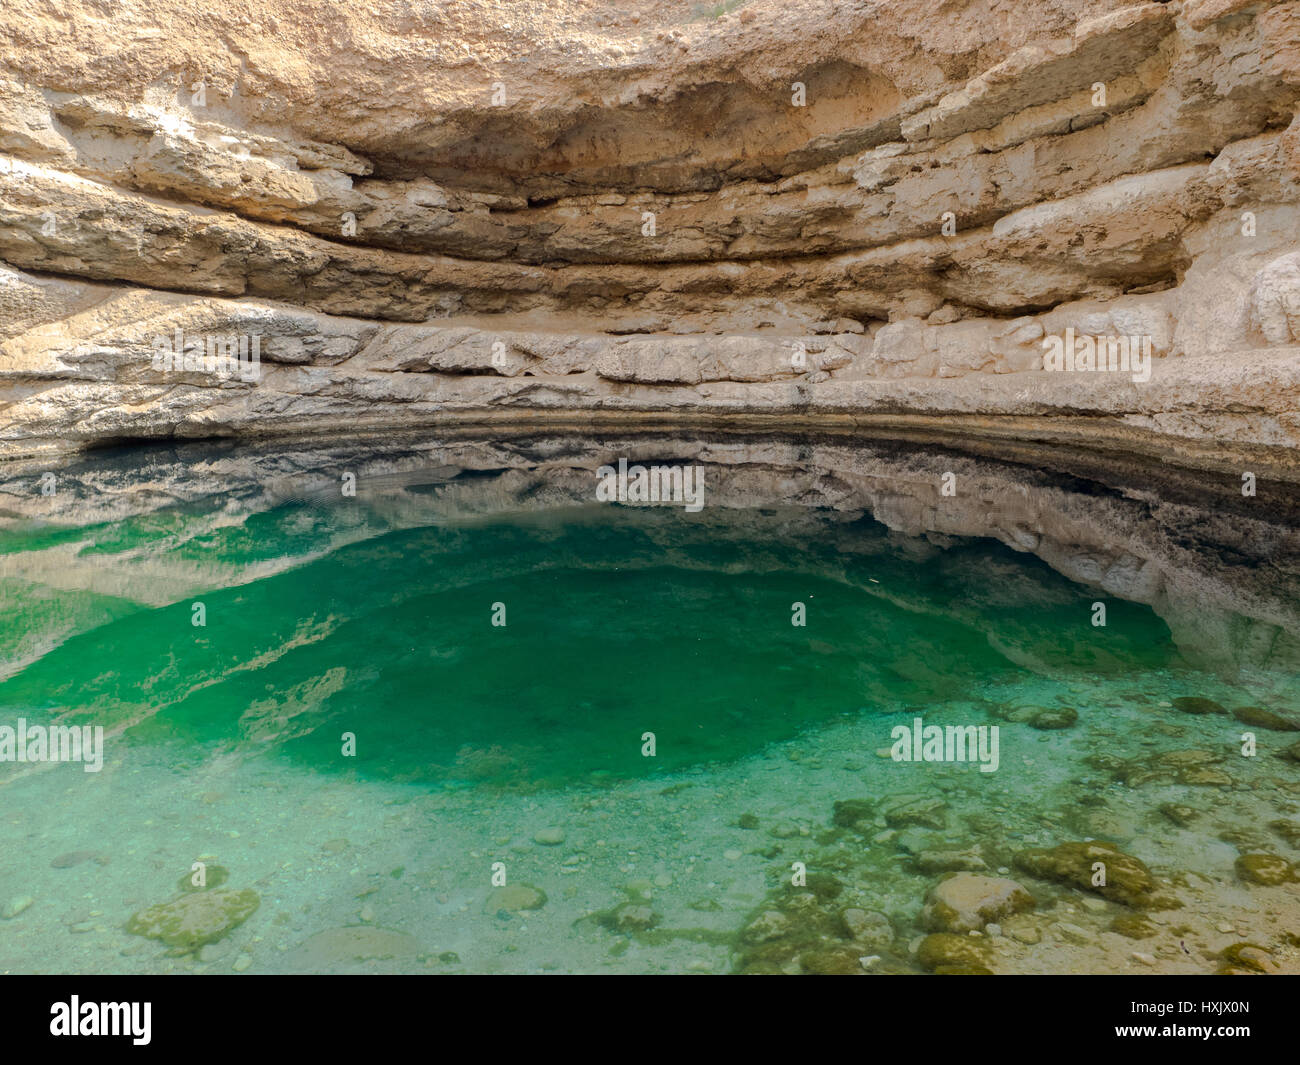 Bimmah sink hole, a water-filled depression in the limestone of eastern Muscat Governorate in the Sultanate of Oman. Stock Photo